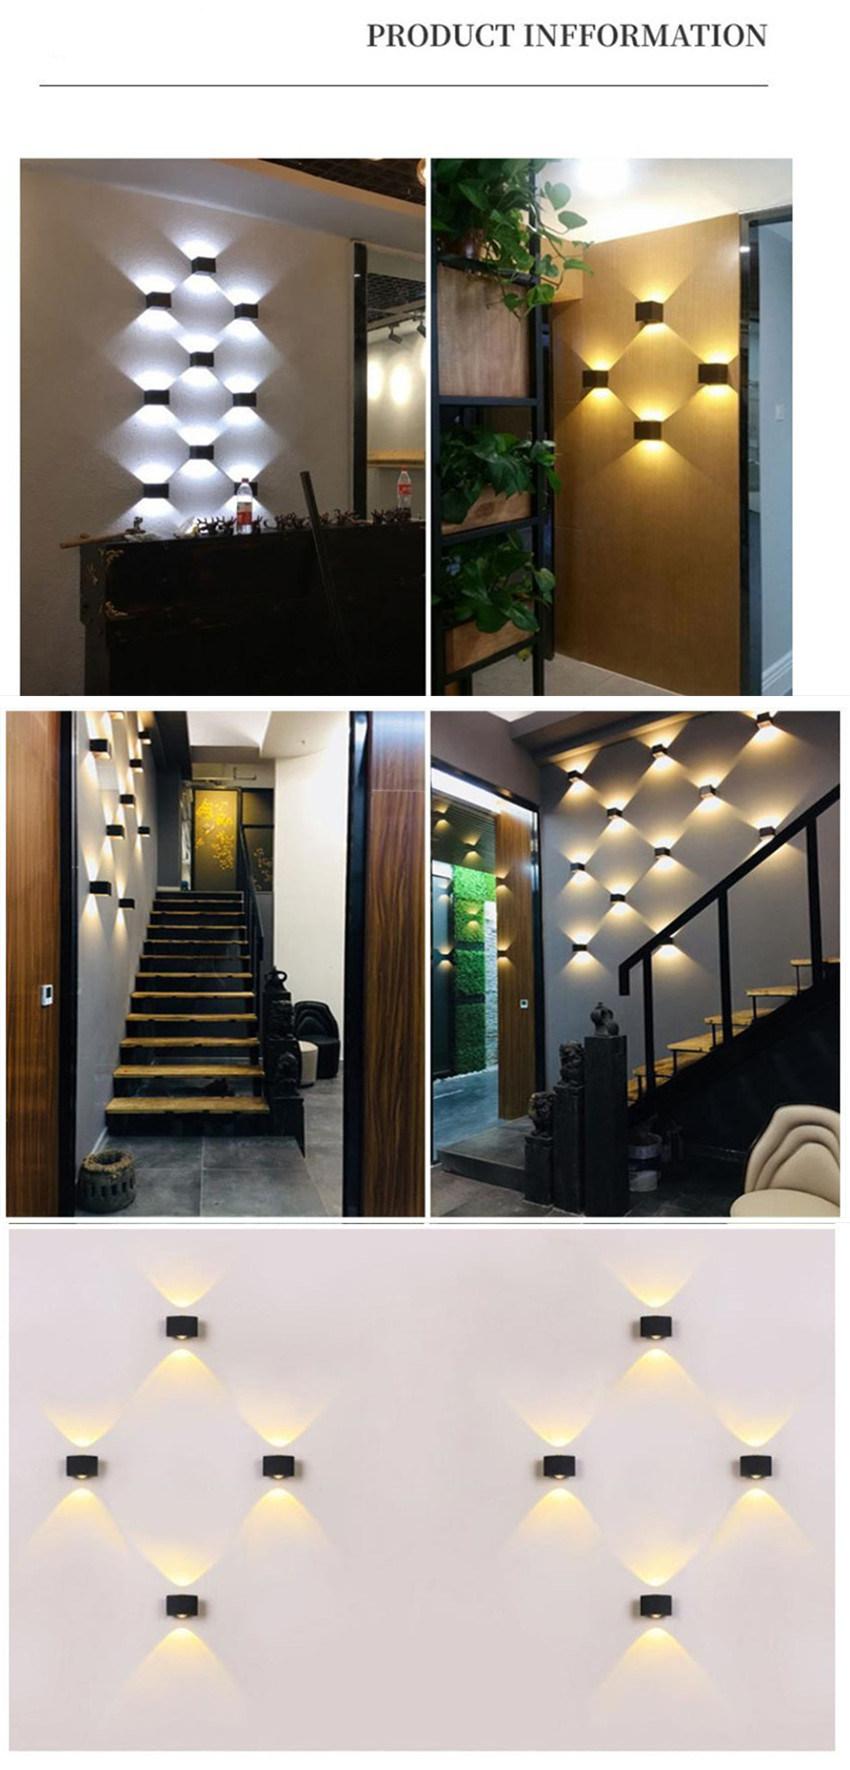 up and Down IP54 Waterproof Aluminum Decorative LED Wall Light